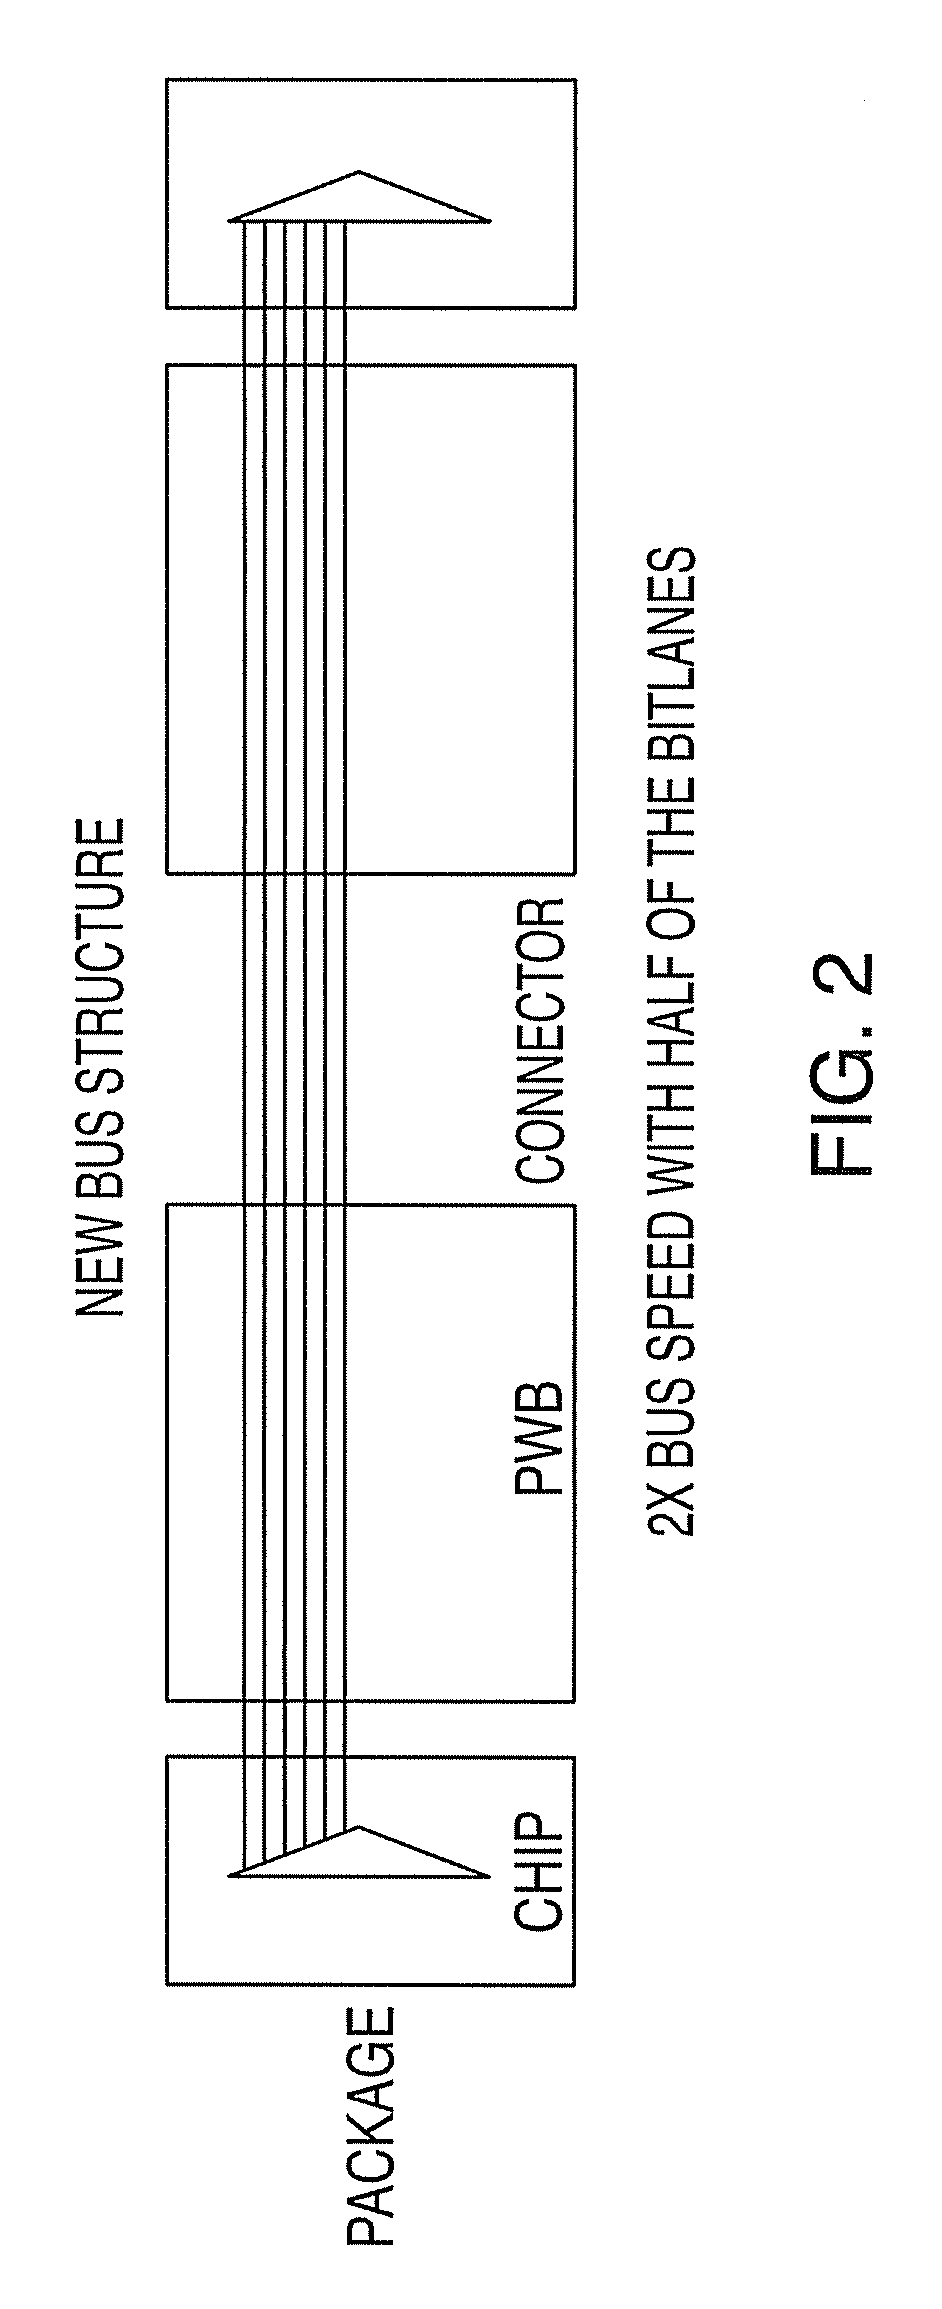 Systems, methods, and computer program products for providing a two-bit symbol bus error correcting code with all checkbits transferred last